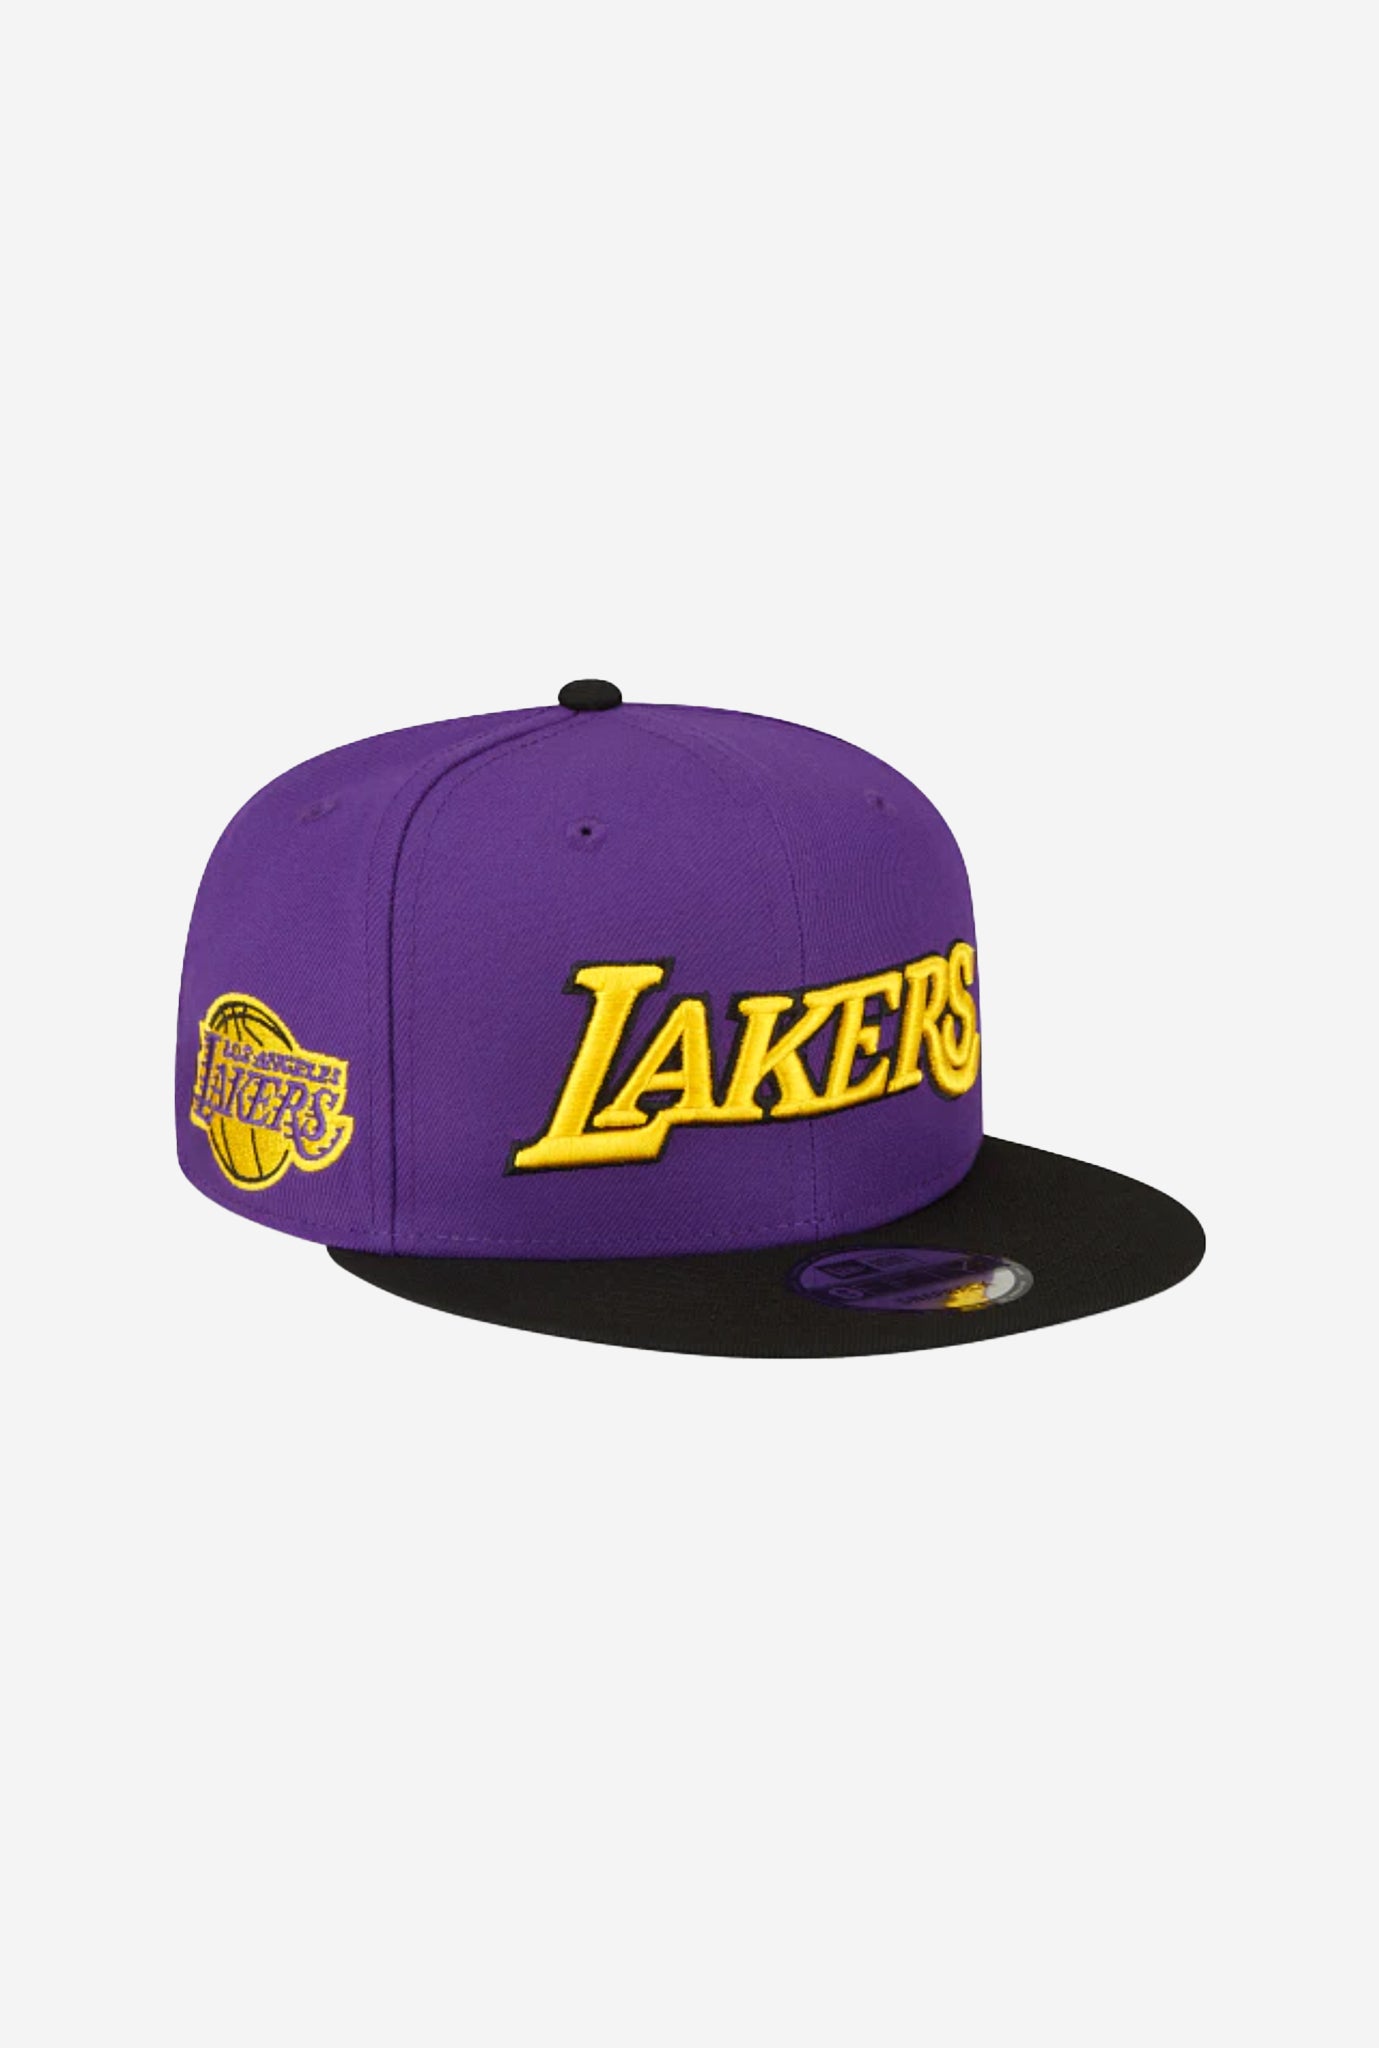 Los Angeles Lakers Statement Edition 9FIFTY